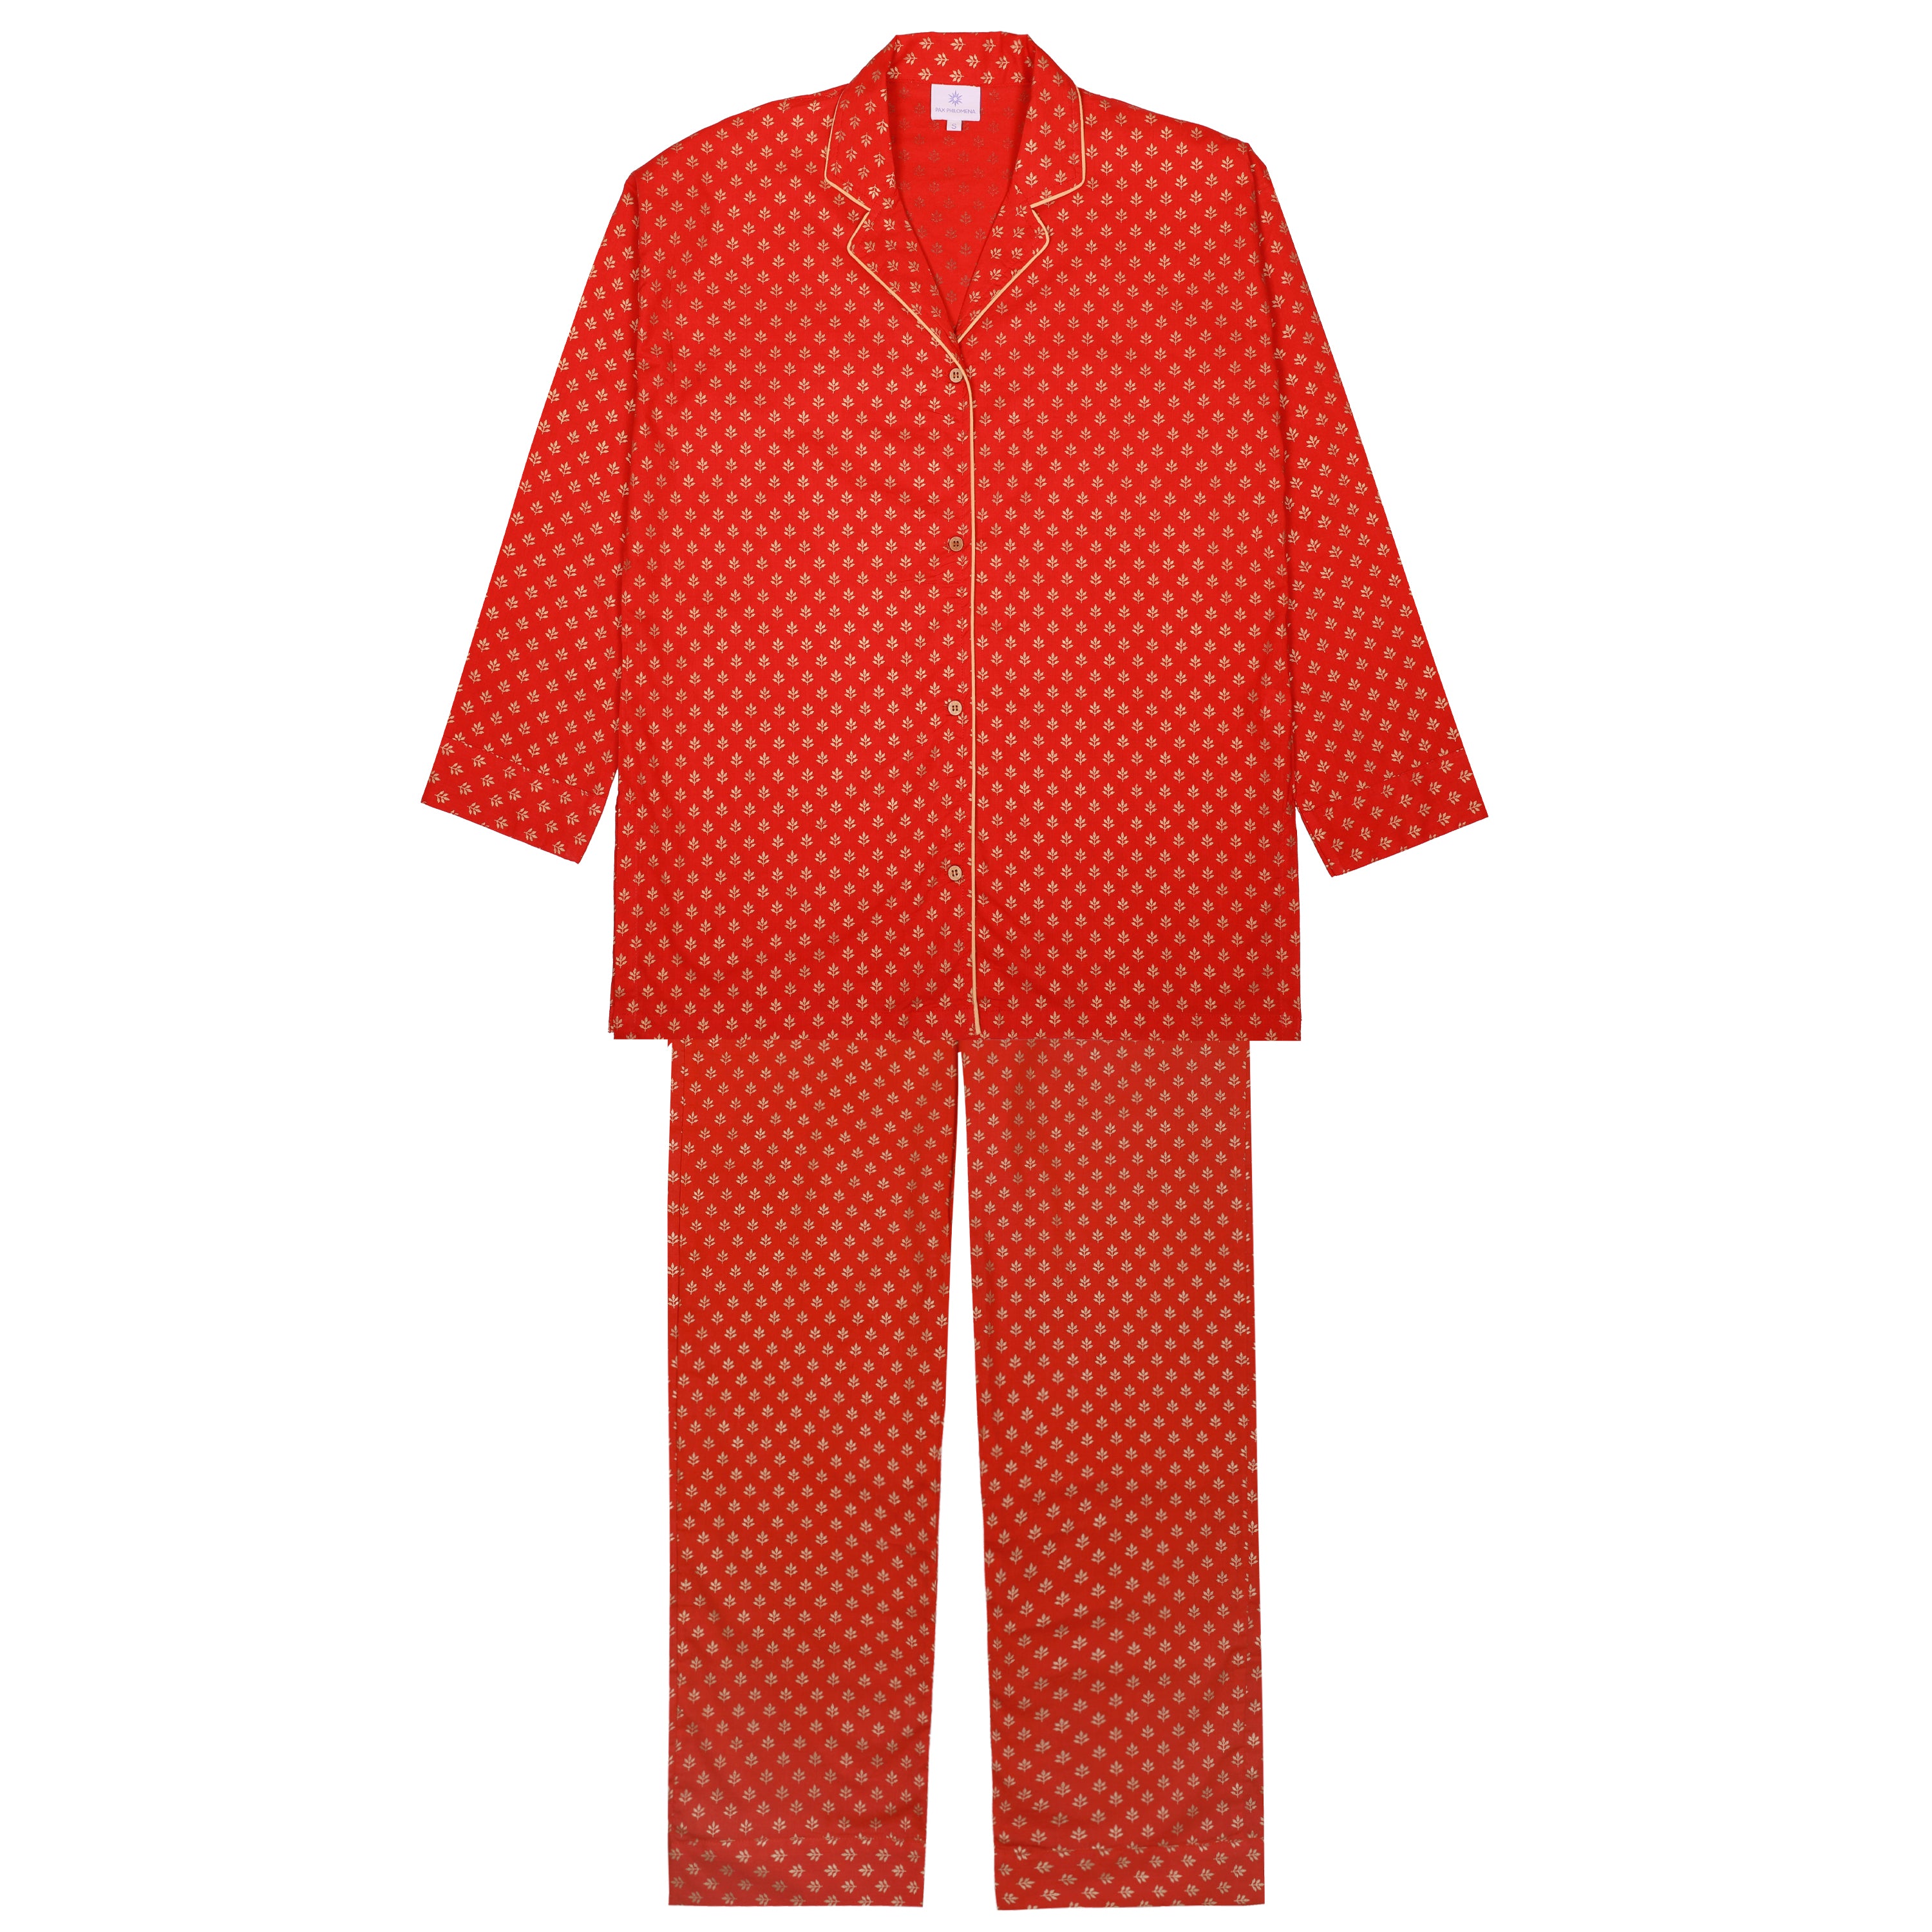 Royal Red Diana Pajama Long Sleeve FINAL SALE EXCHANGE OR STORE CREDIT